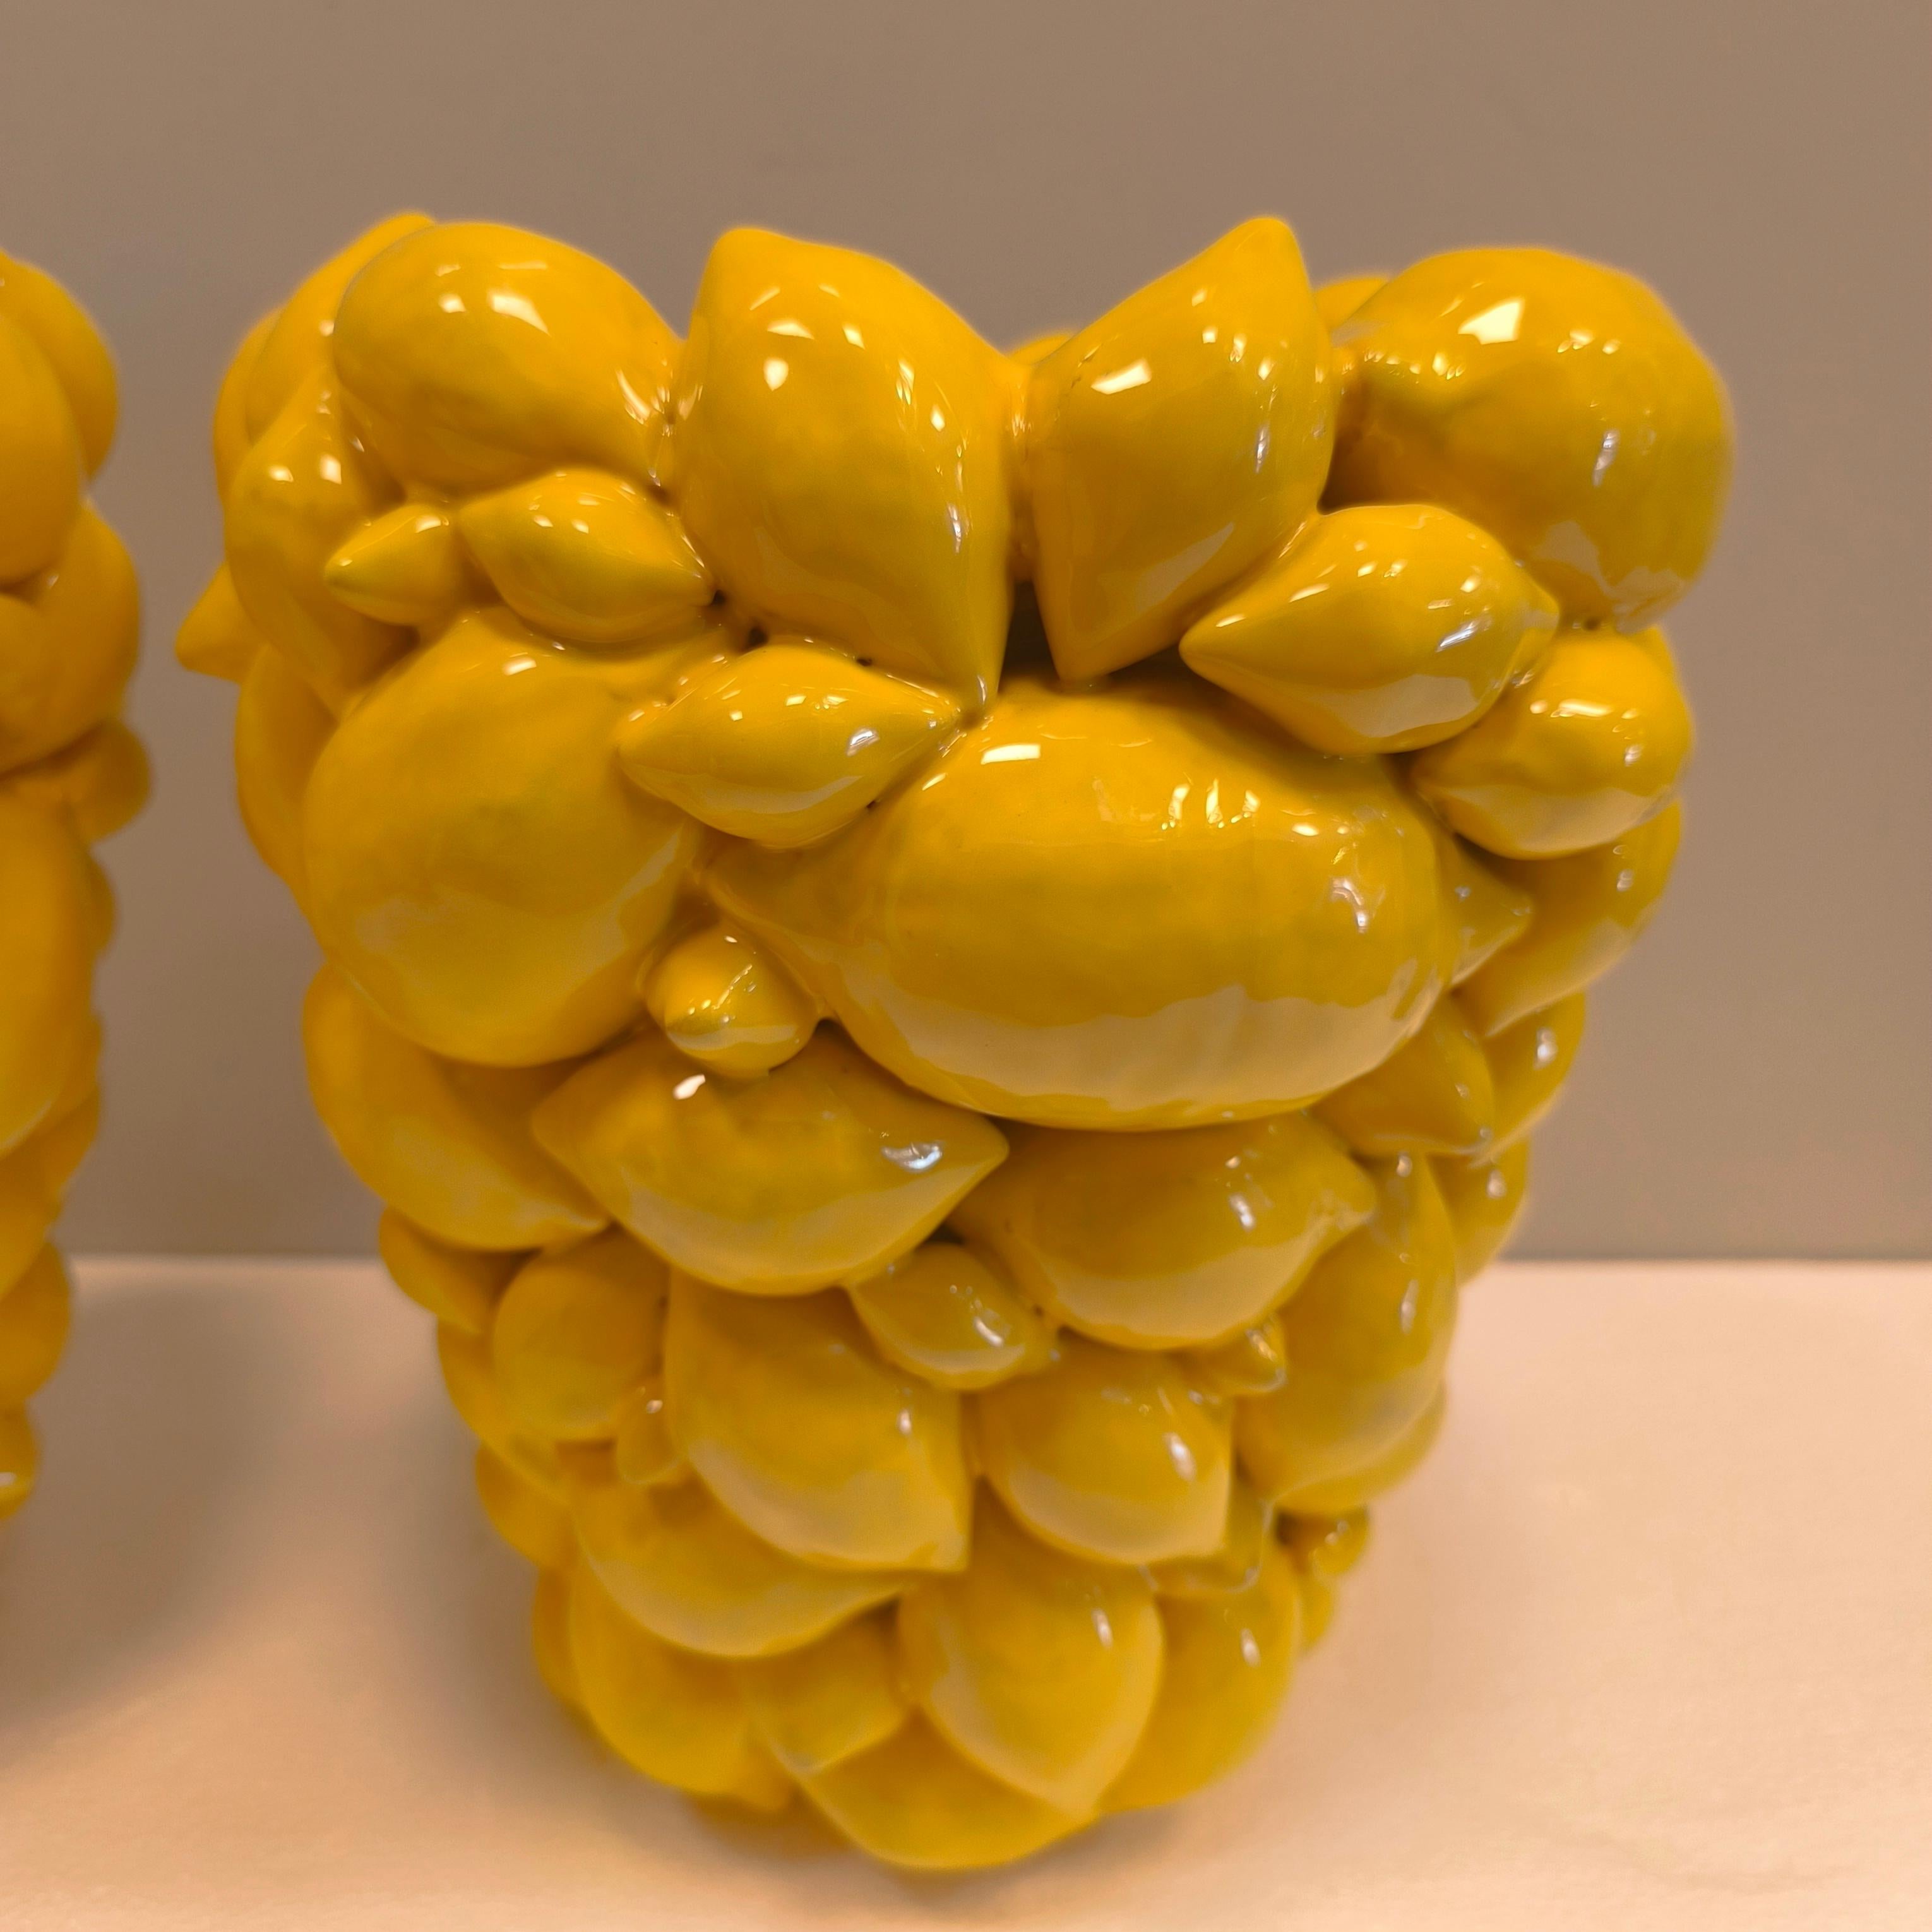 Pair of Italy  lemon vases, Yellow glazed ceramic, R. Acampora, Limited Edition For Sale 2